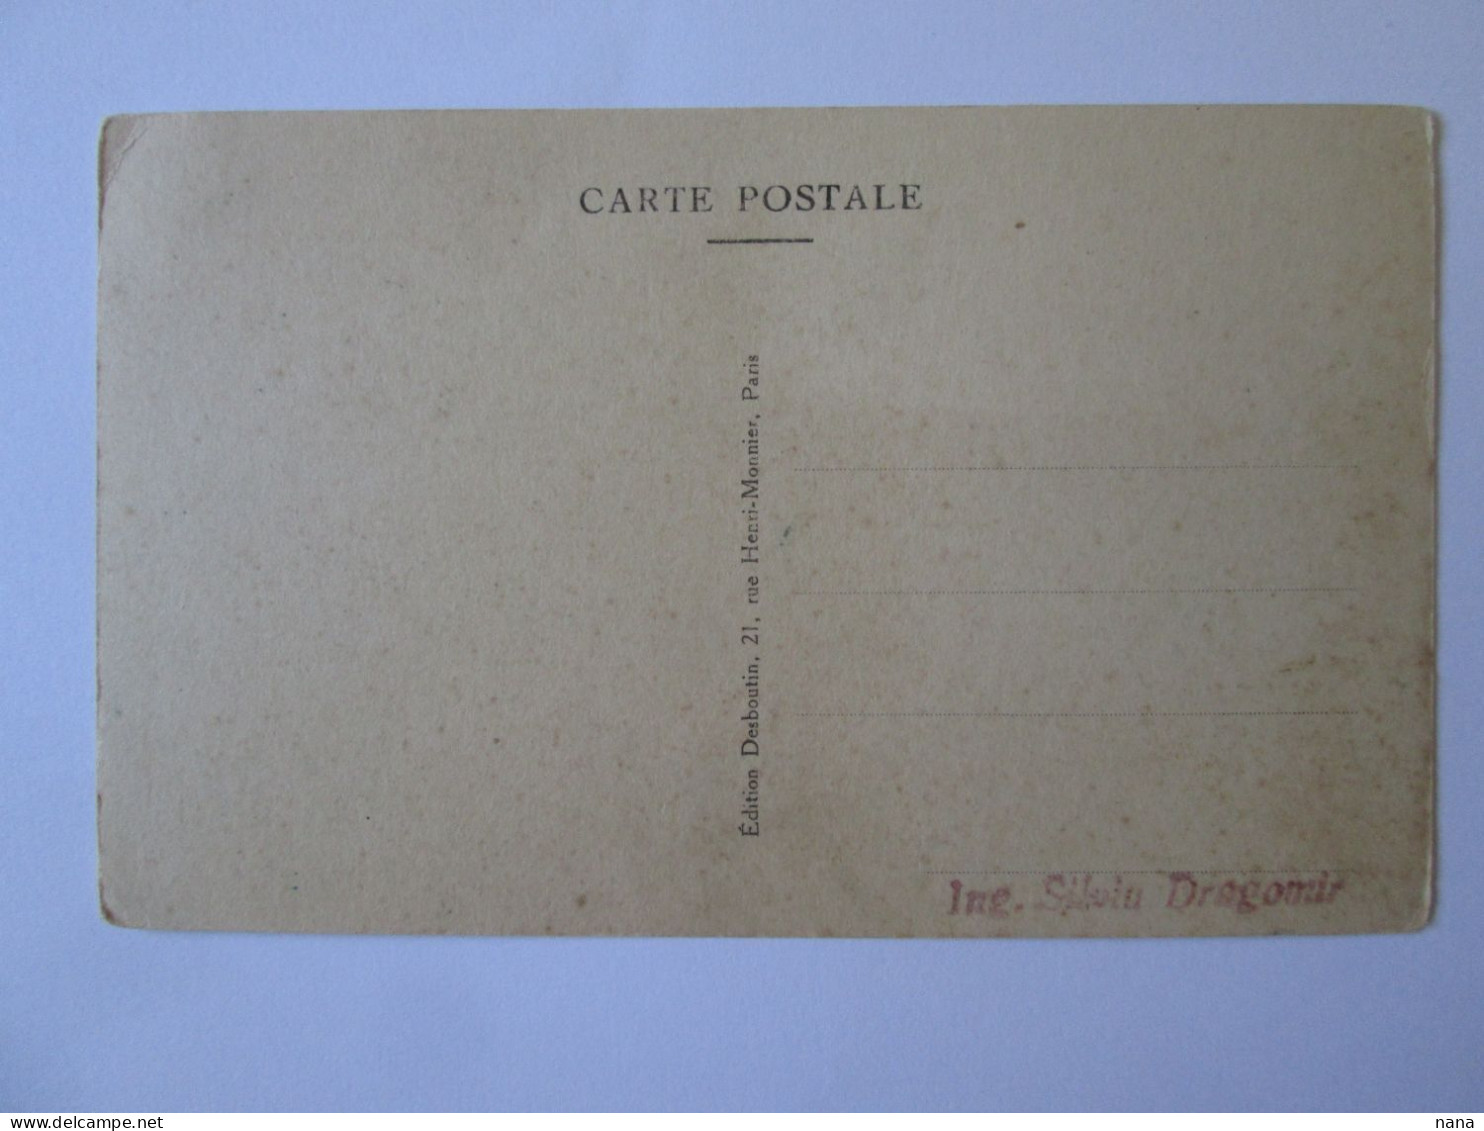 Syrie-Damas:Mosquee Des Omeyades C.postale Non Voyage Vers 1920 - Syrie